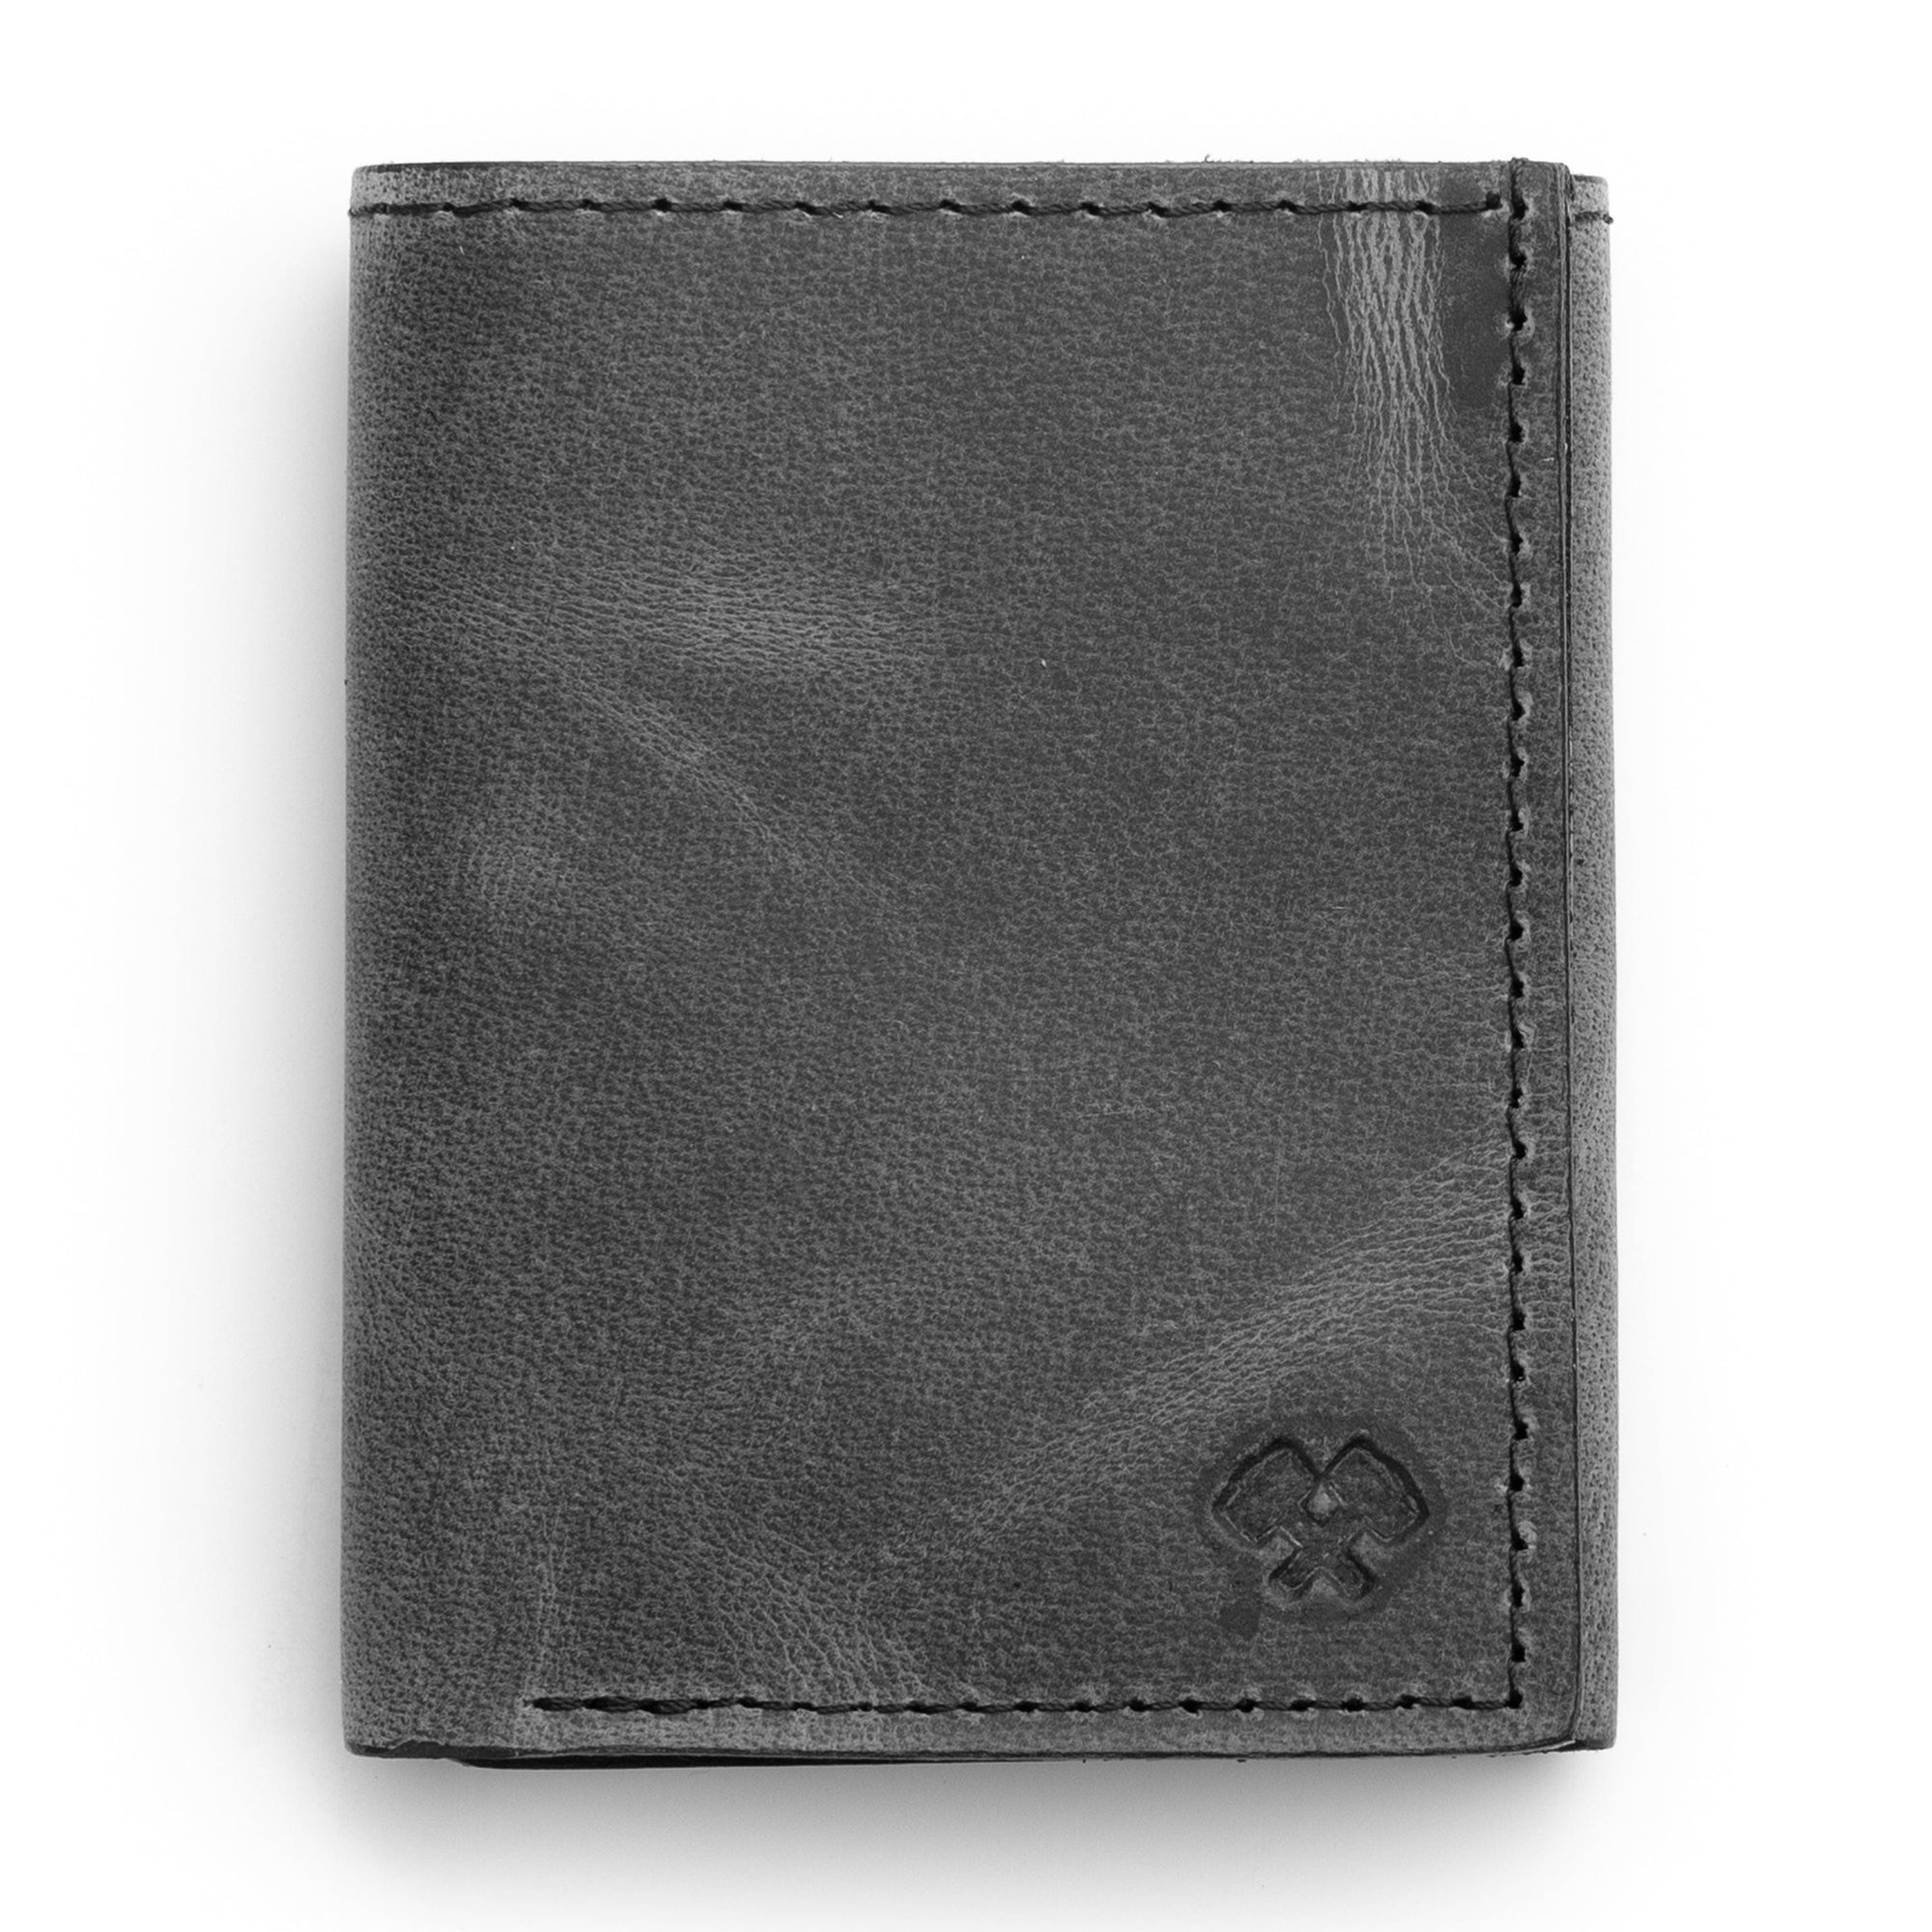 Main Street Forge Wallet Avalanche Gray Trifold Leather Wallet For Men | Made In USA | Genuine Full Grain Leather Men's Tri Fold Wallet 816895026977